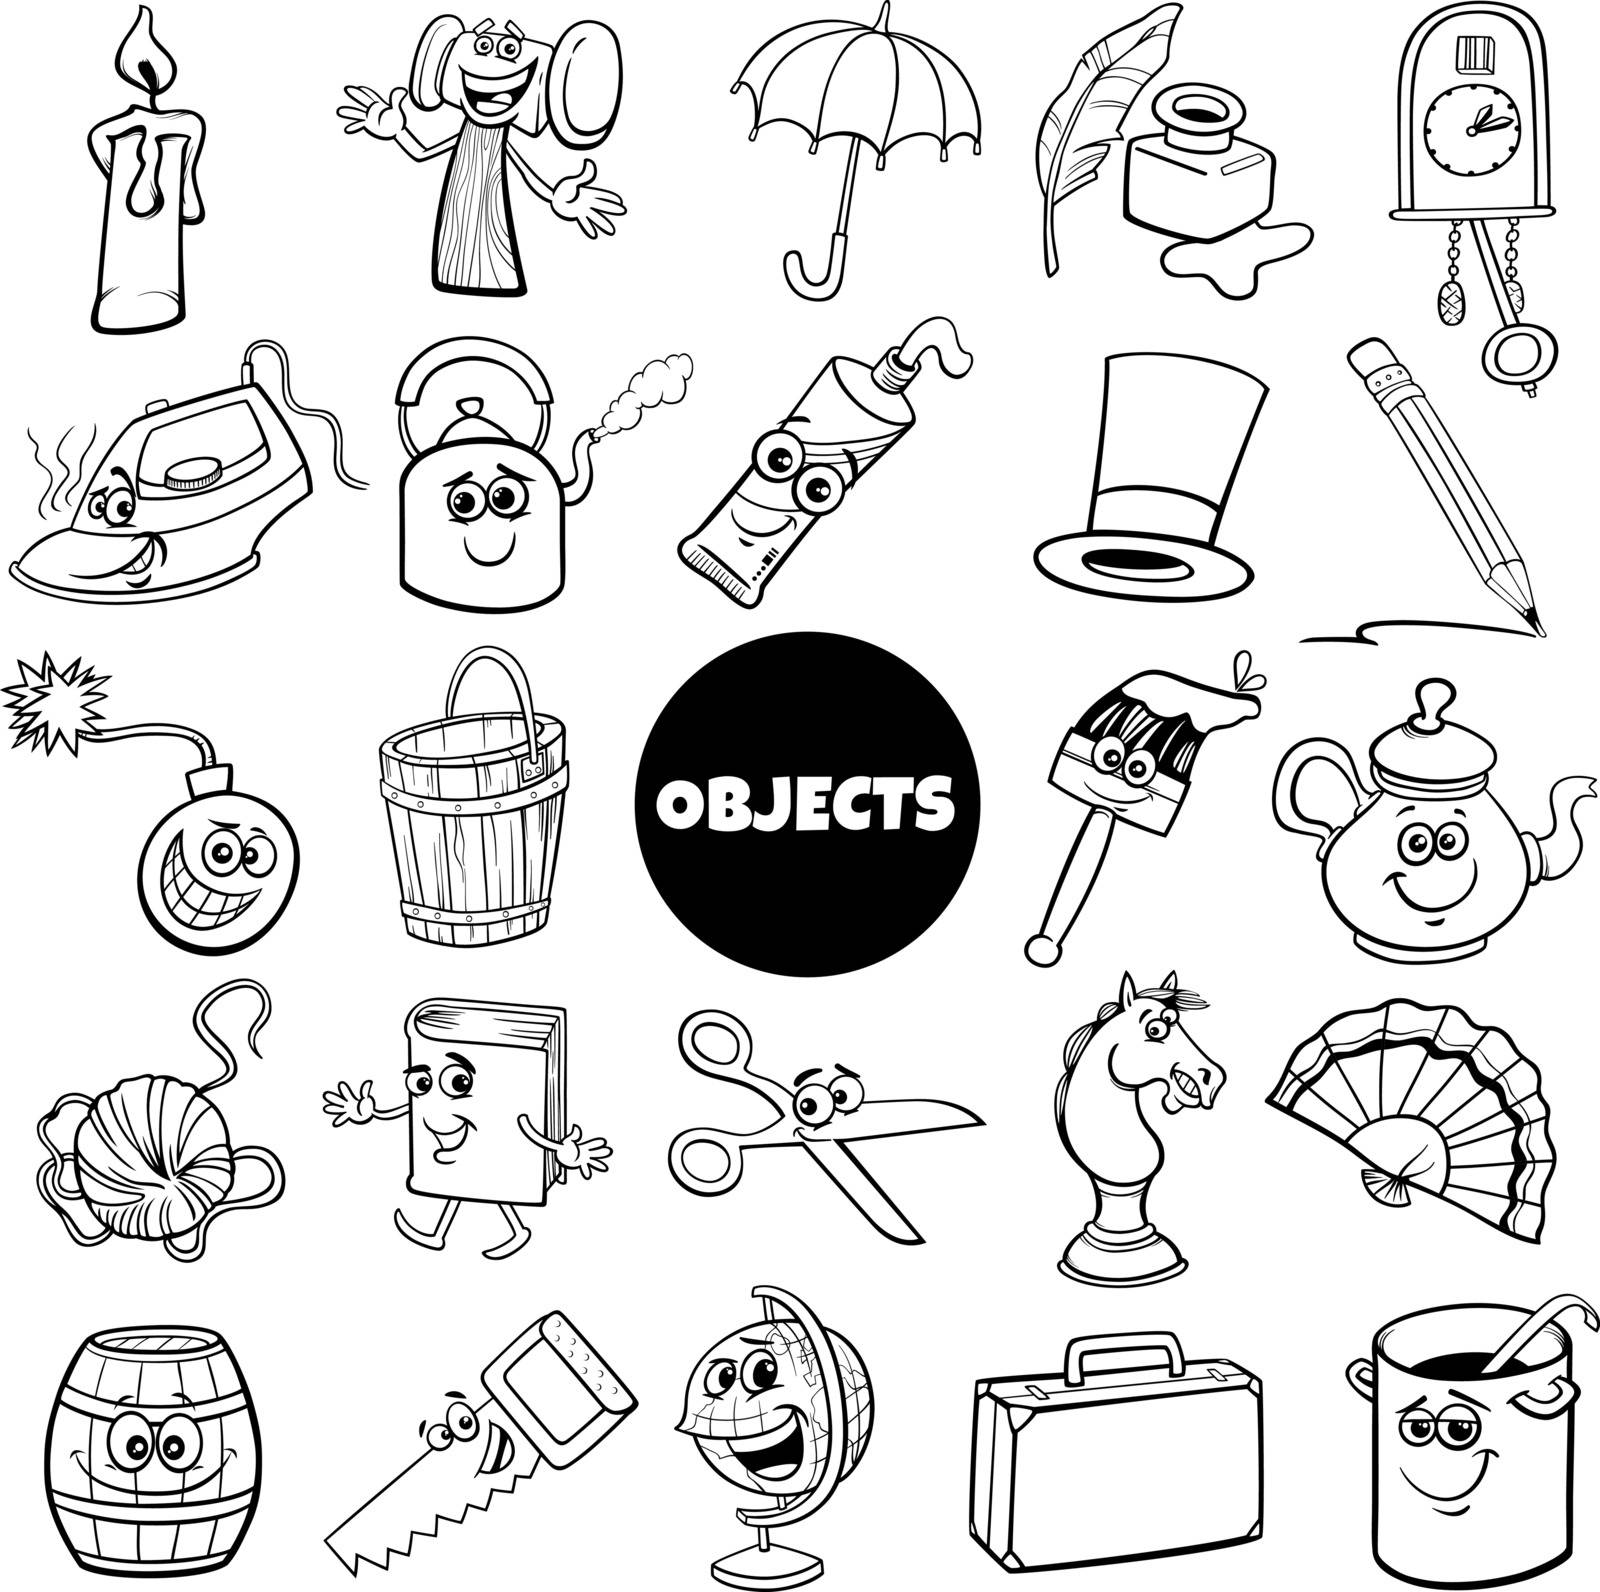 Black and White Cartoon Illustration of Everyday or Home Related Objects Big Set